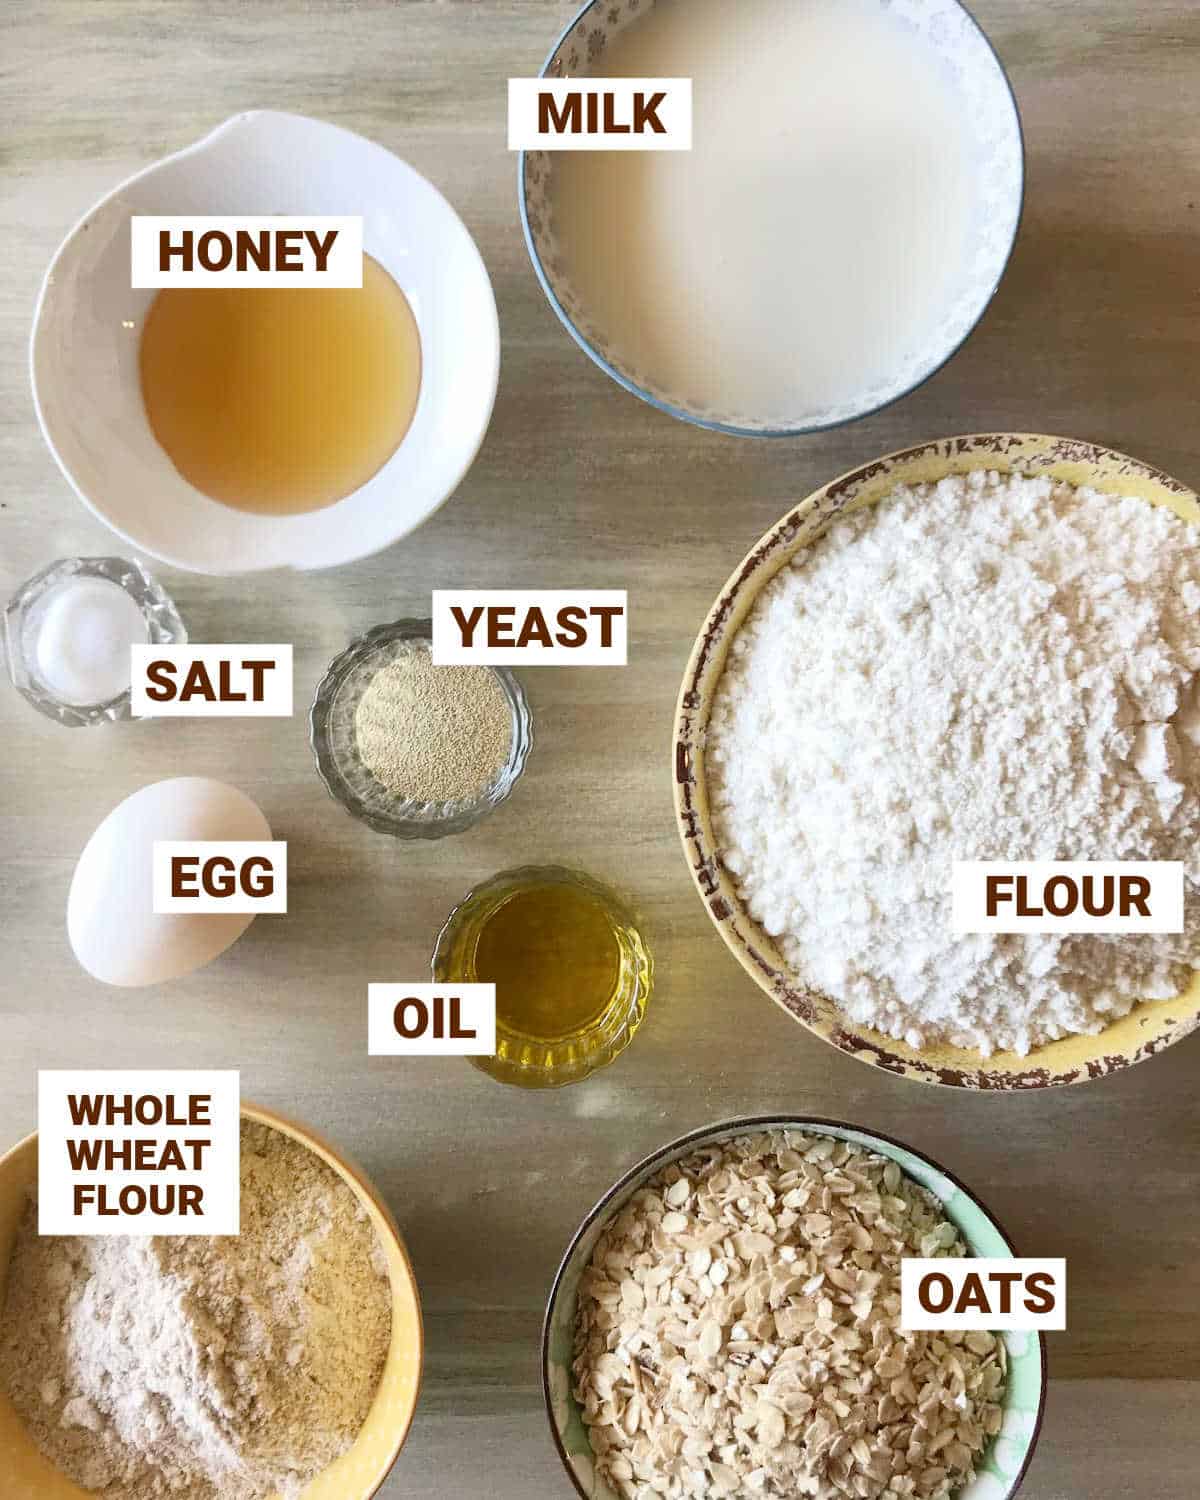 Whole wheat oatmeal bread ingredients in bowls on a beige surface including milk, honey, egg, yeast, oil, flours, salt.